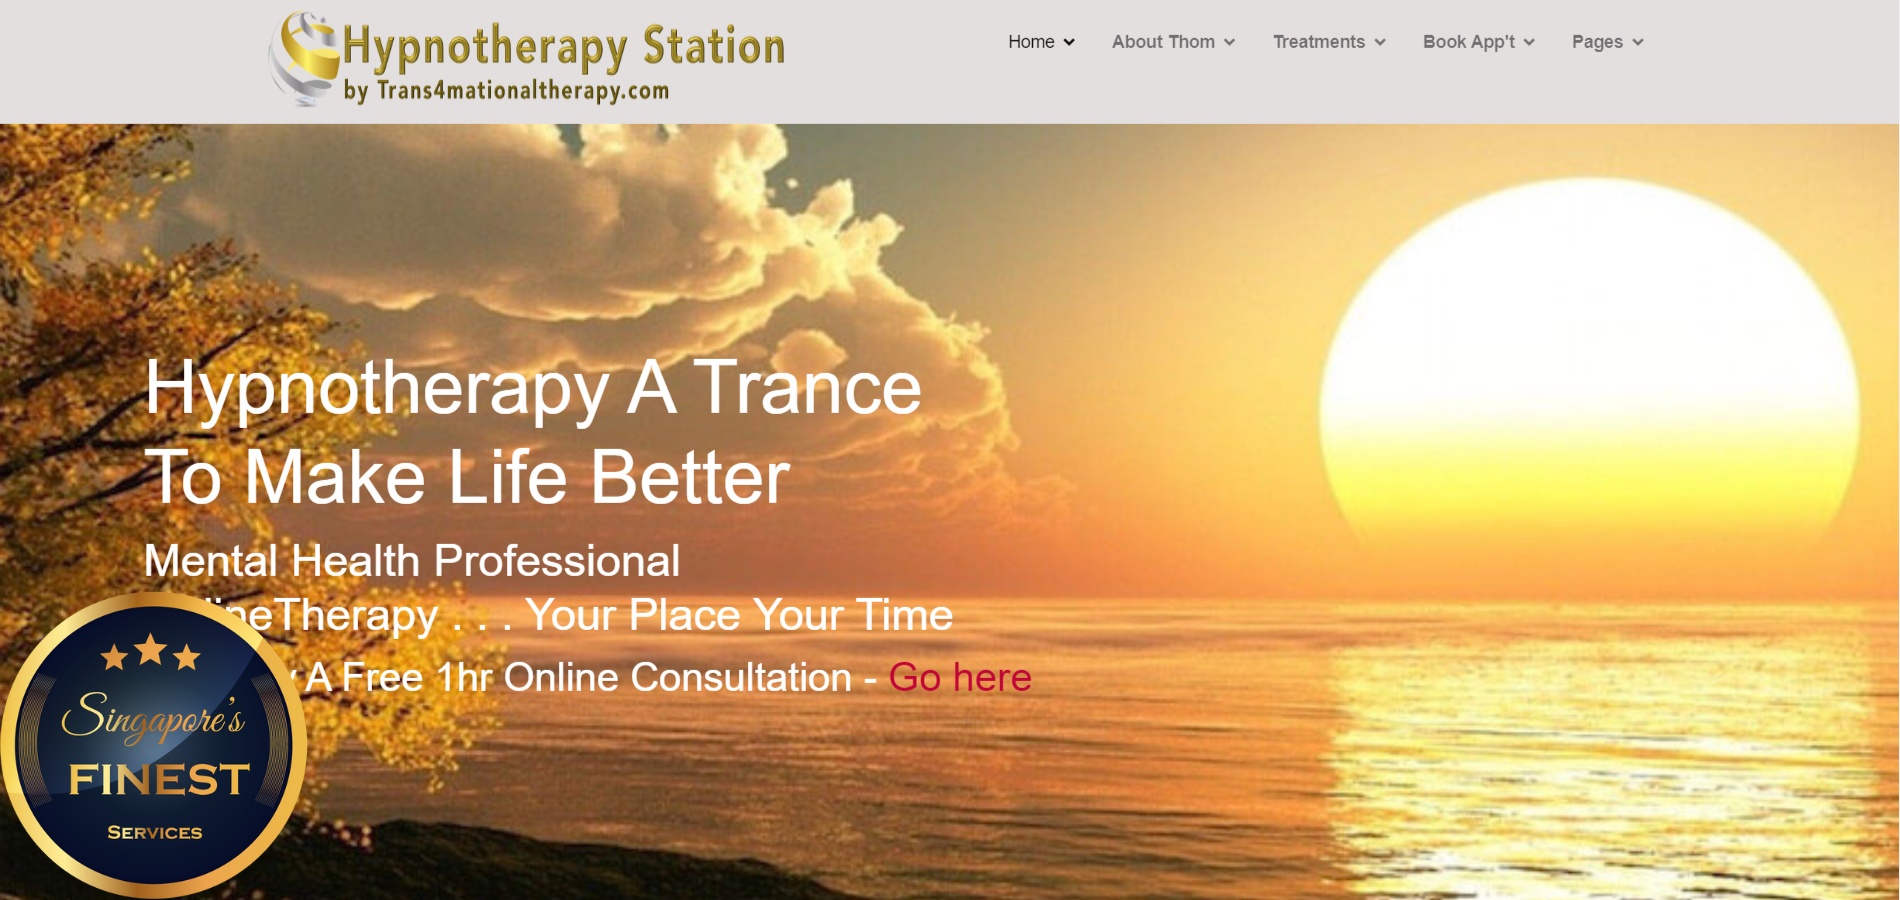 The Finest Hypnotherapy in Singapore